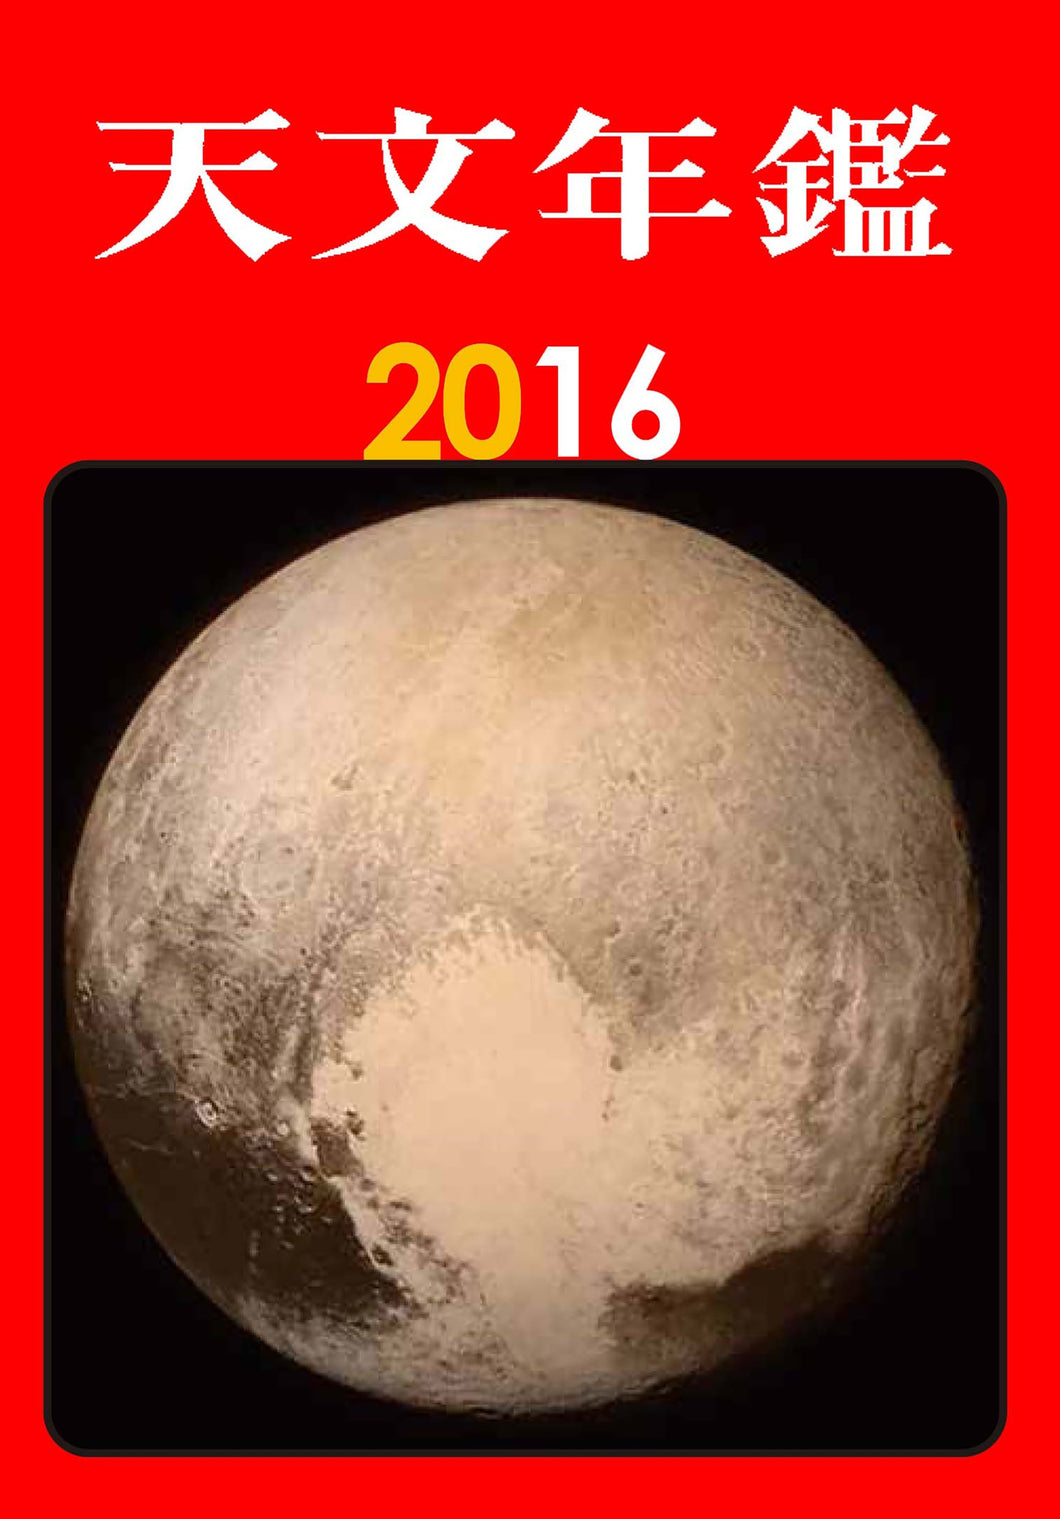 Astronomical Yearbook 2016